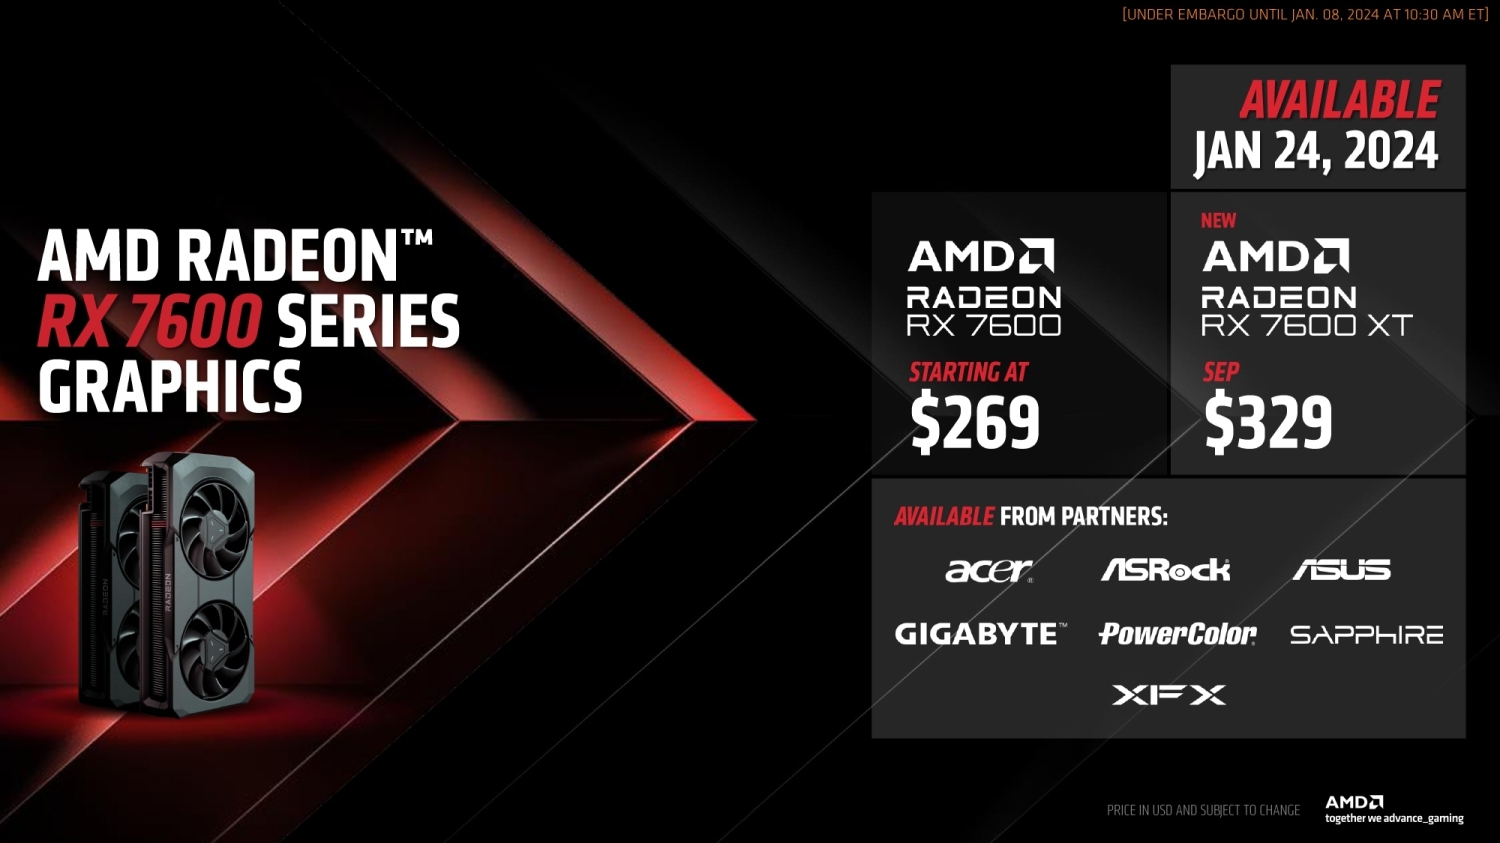 AMD Launches Radeon RX 6600: More Mainstream Gaming For $329